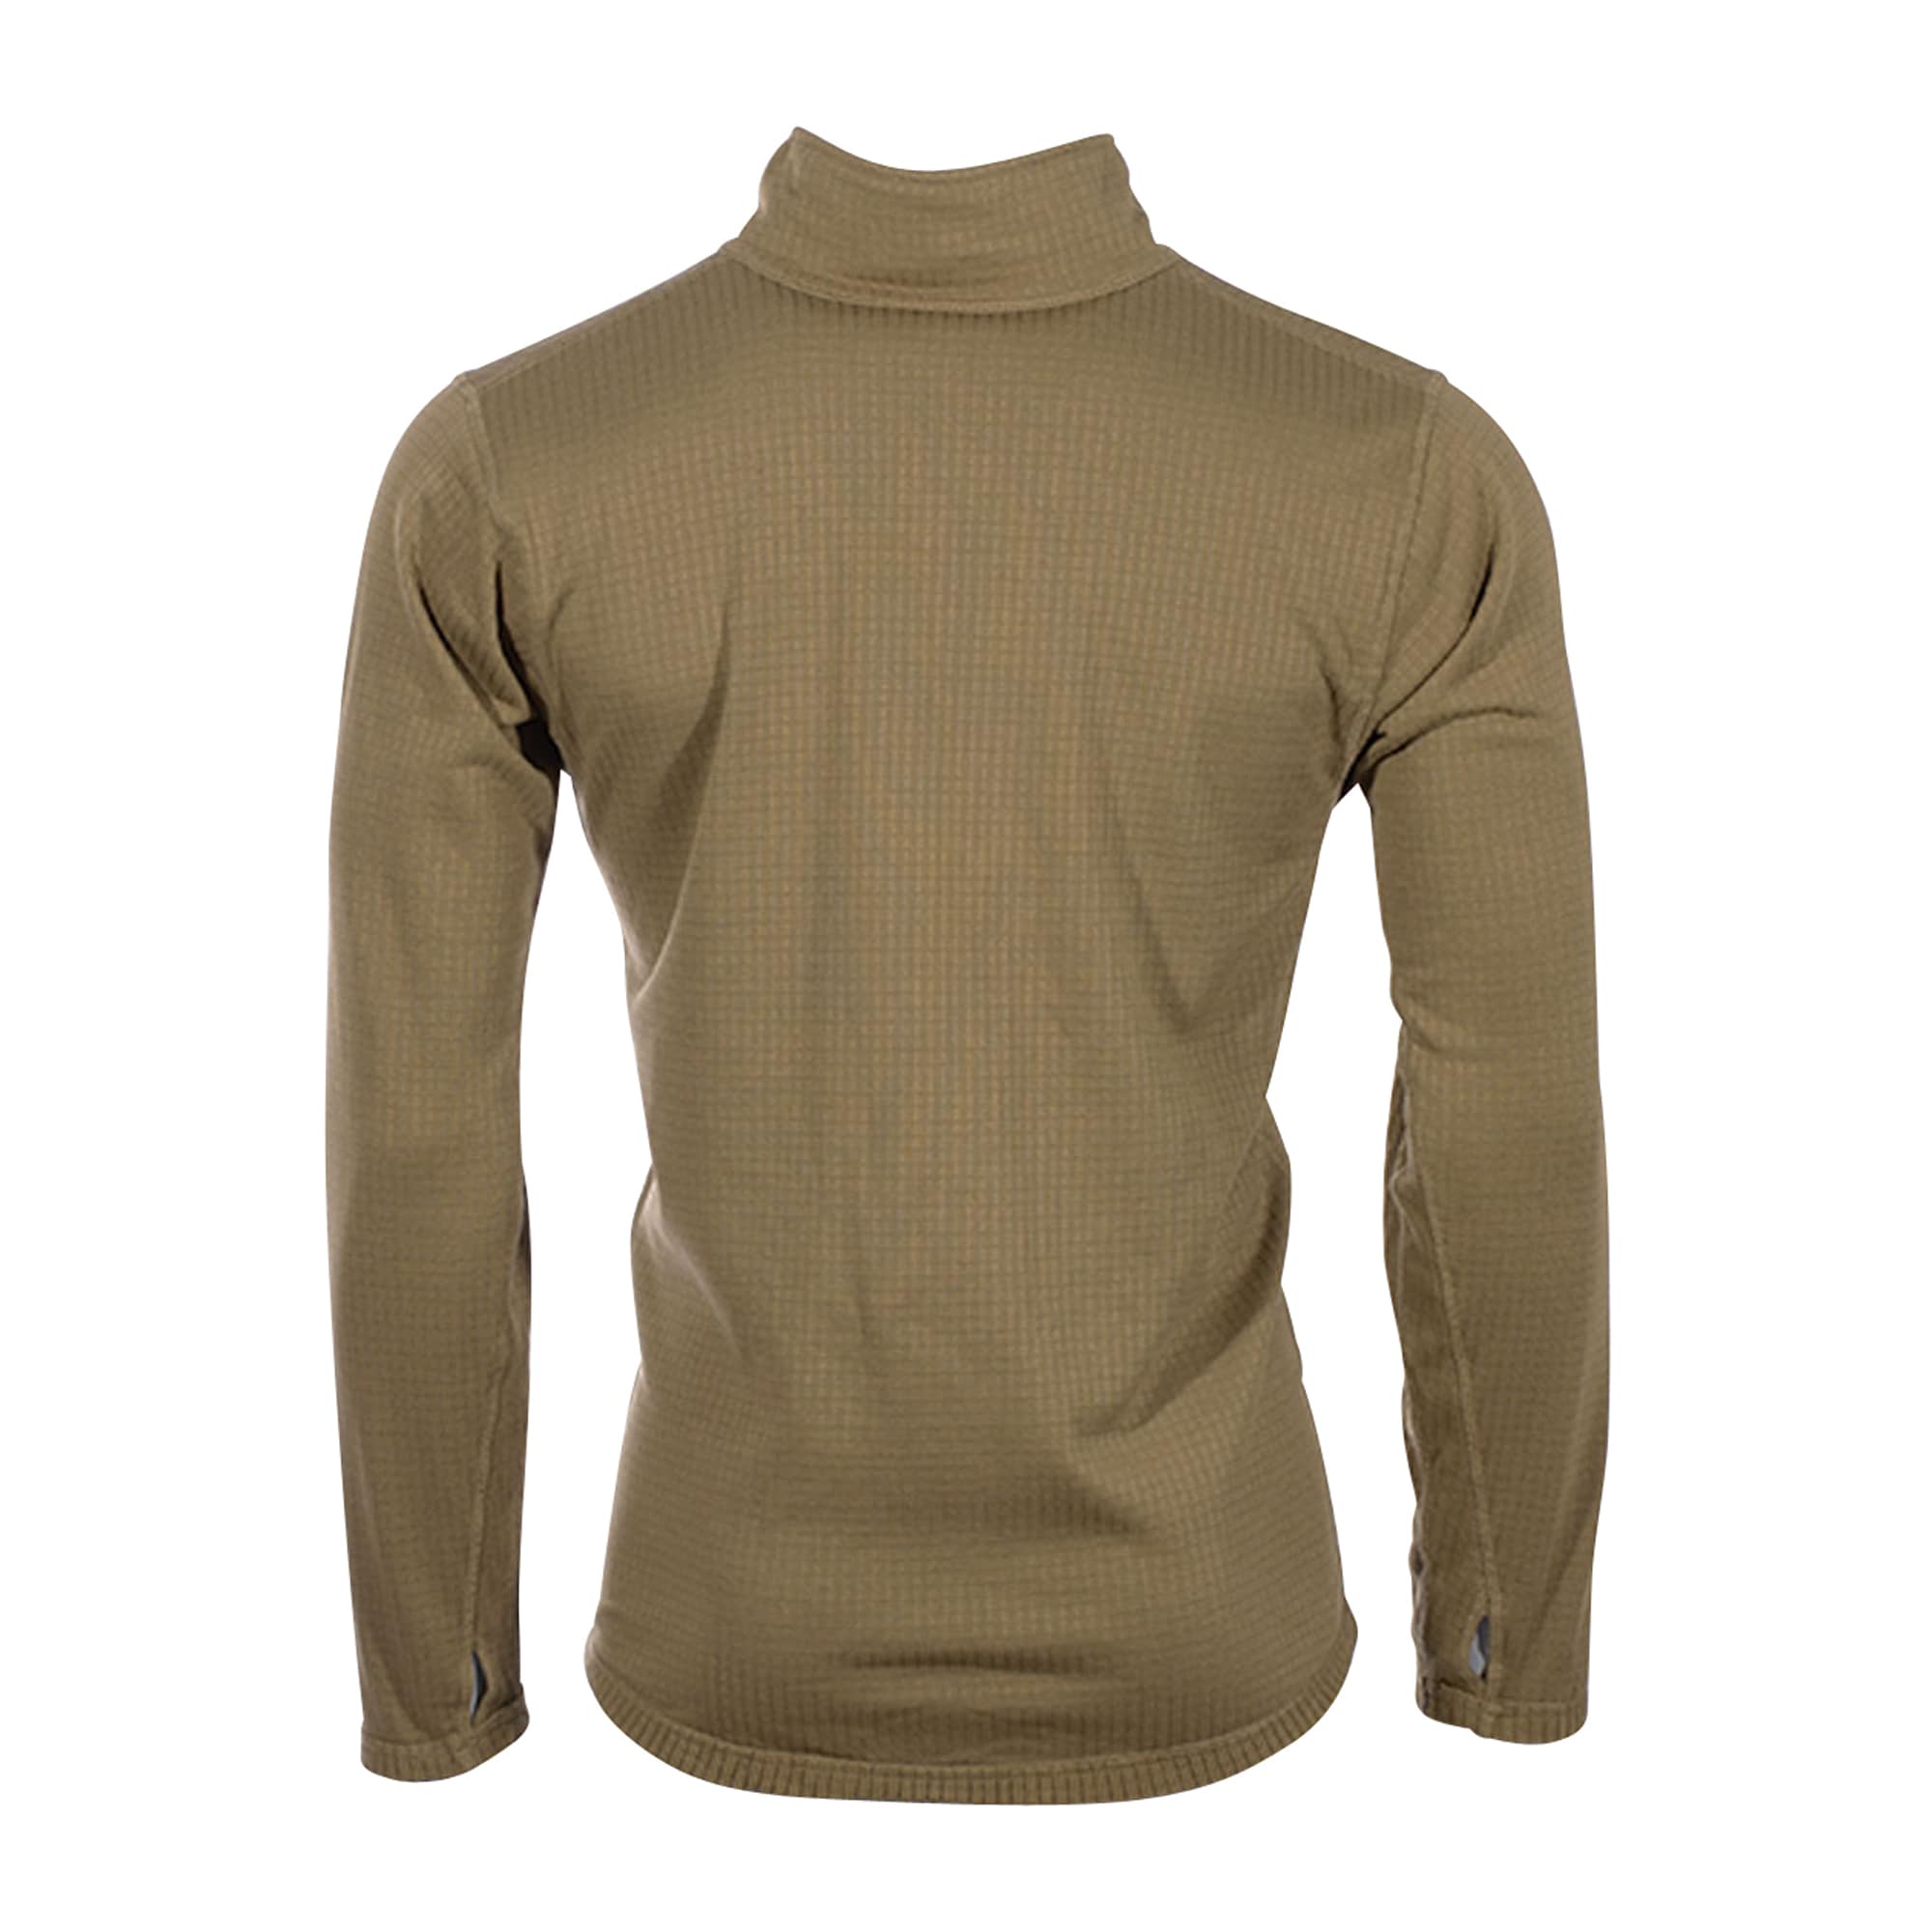 Purchase the MFH Shirt GEN III ECWCS Level-2 olive by ASMC